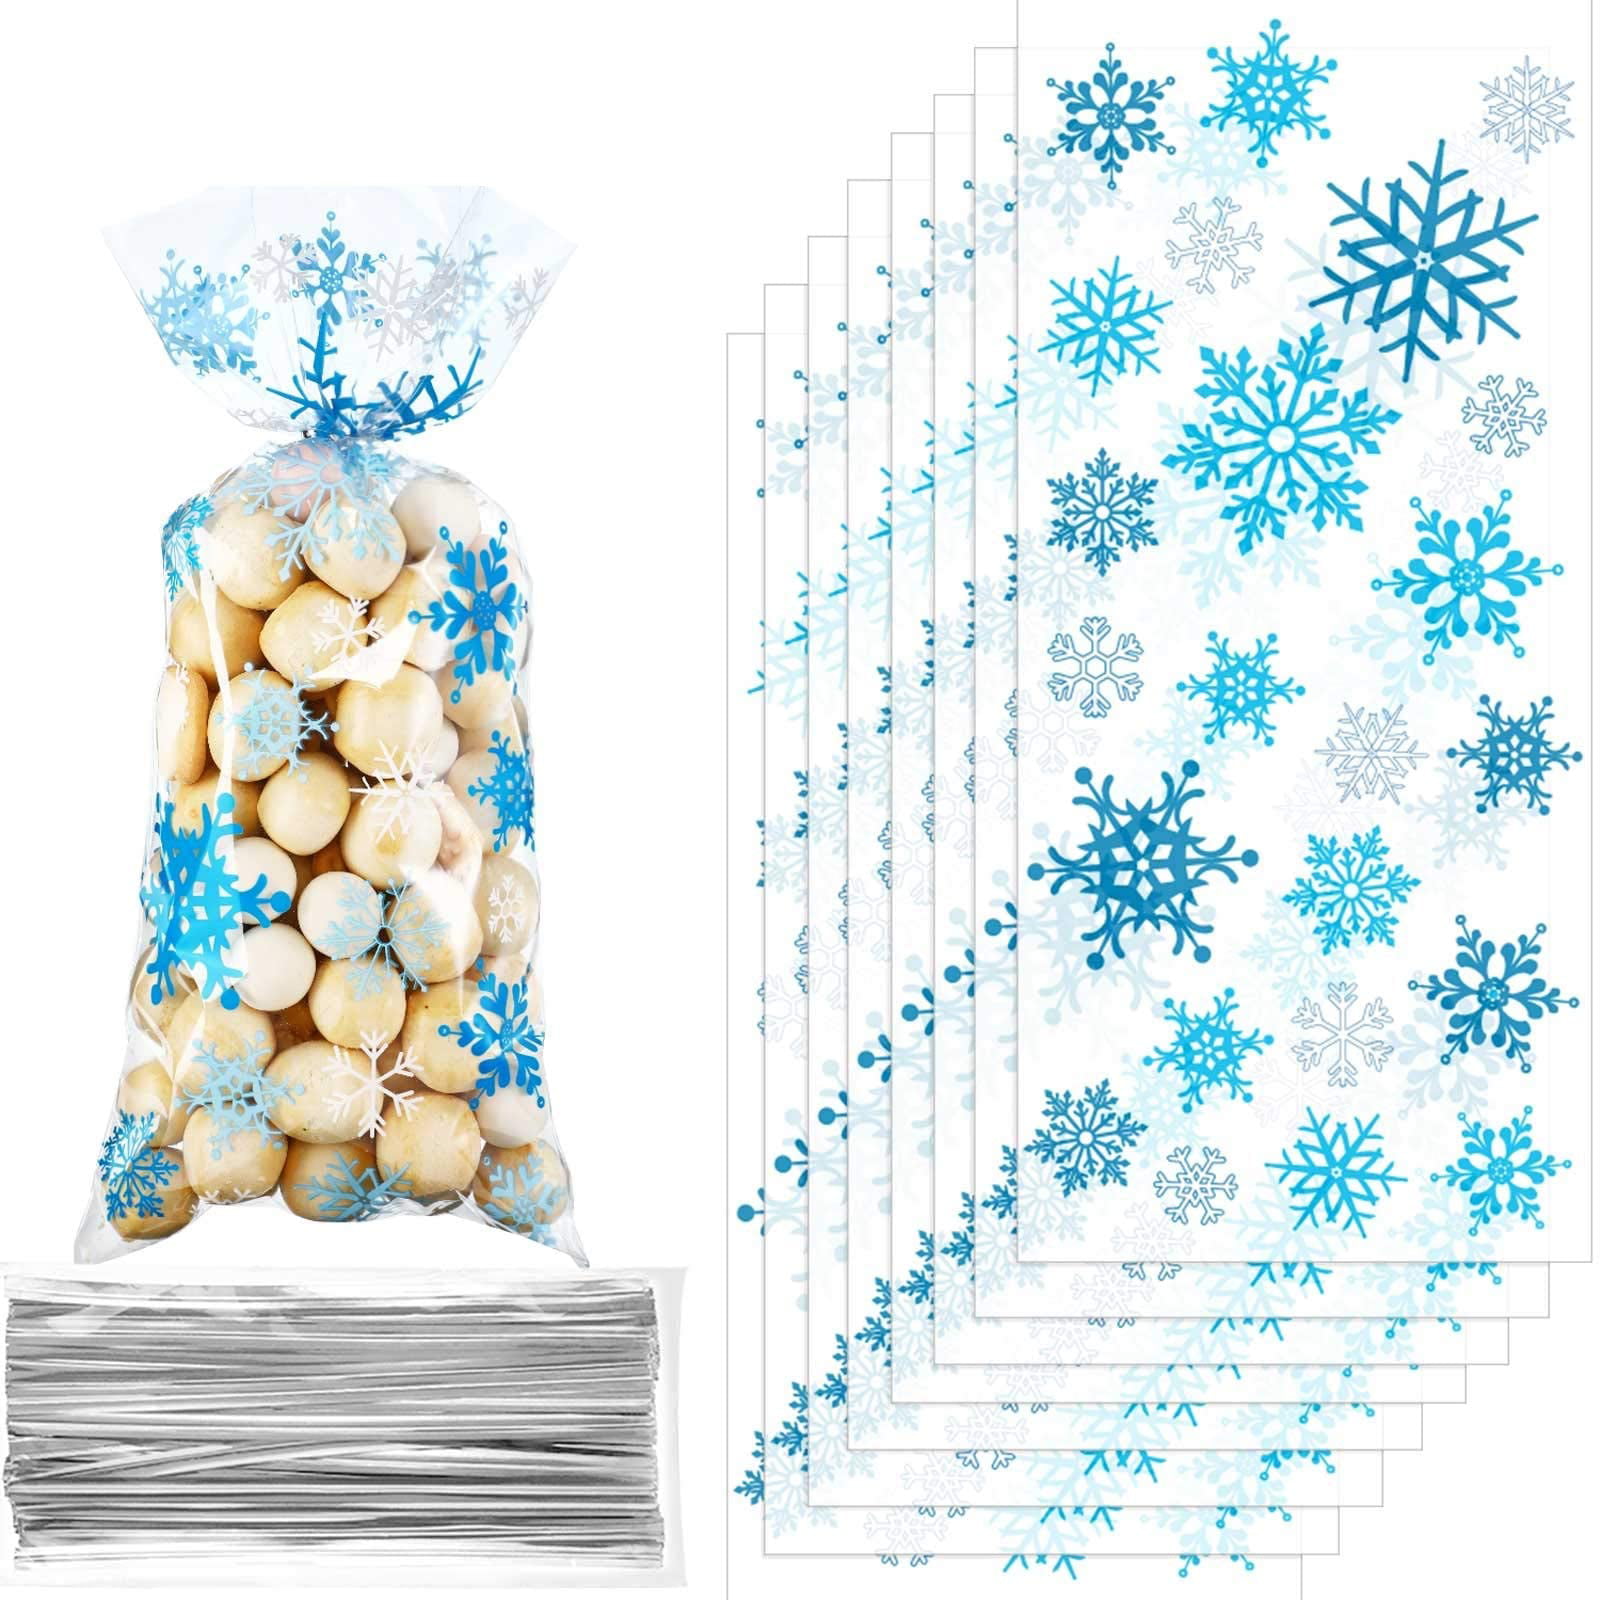 100 Pcs Christmas Snow Shape Cellophane Party Cookie Candy Biscuits Gift Bags 